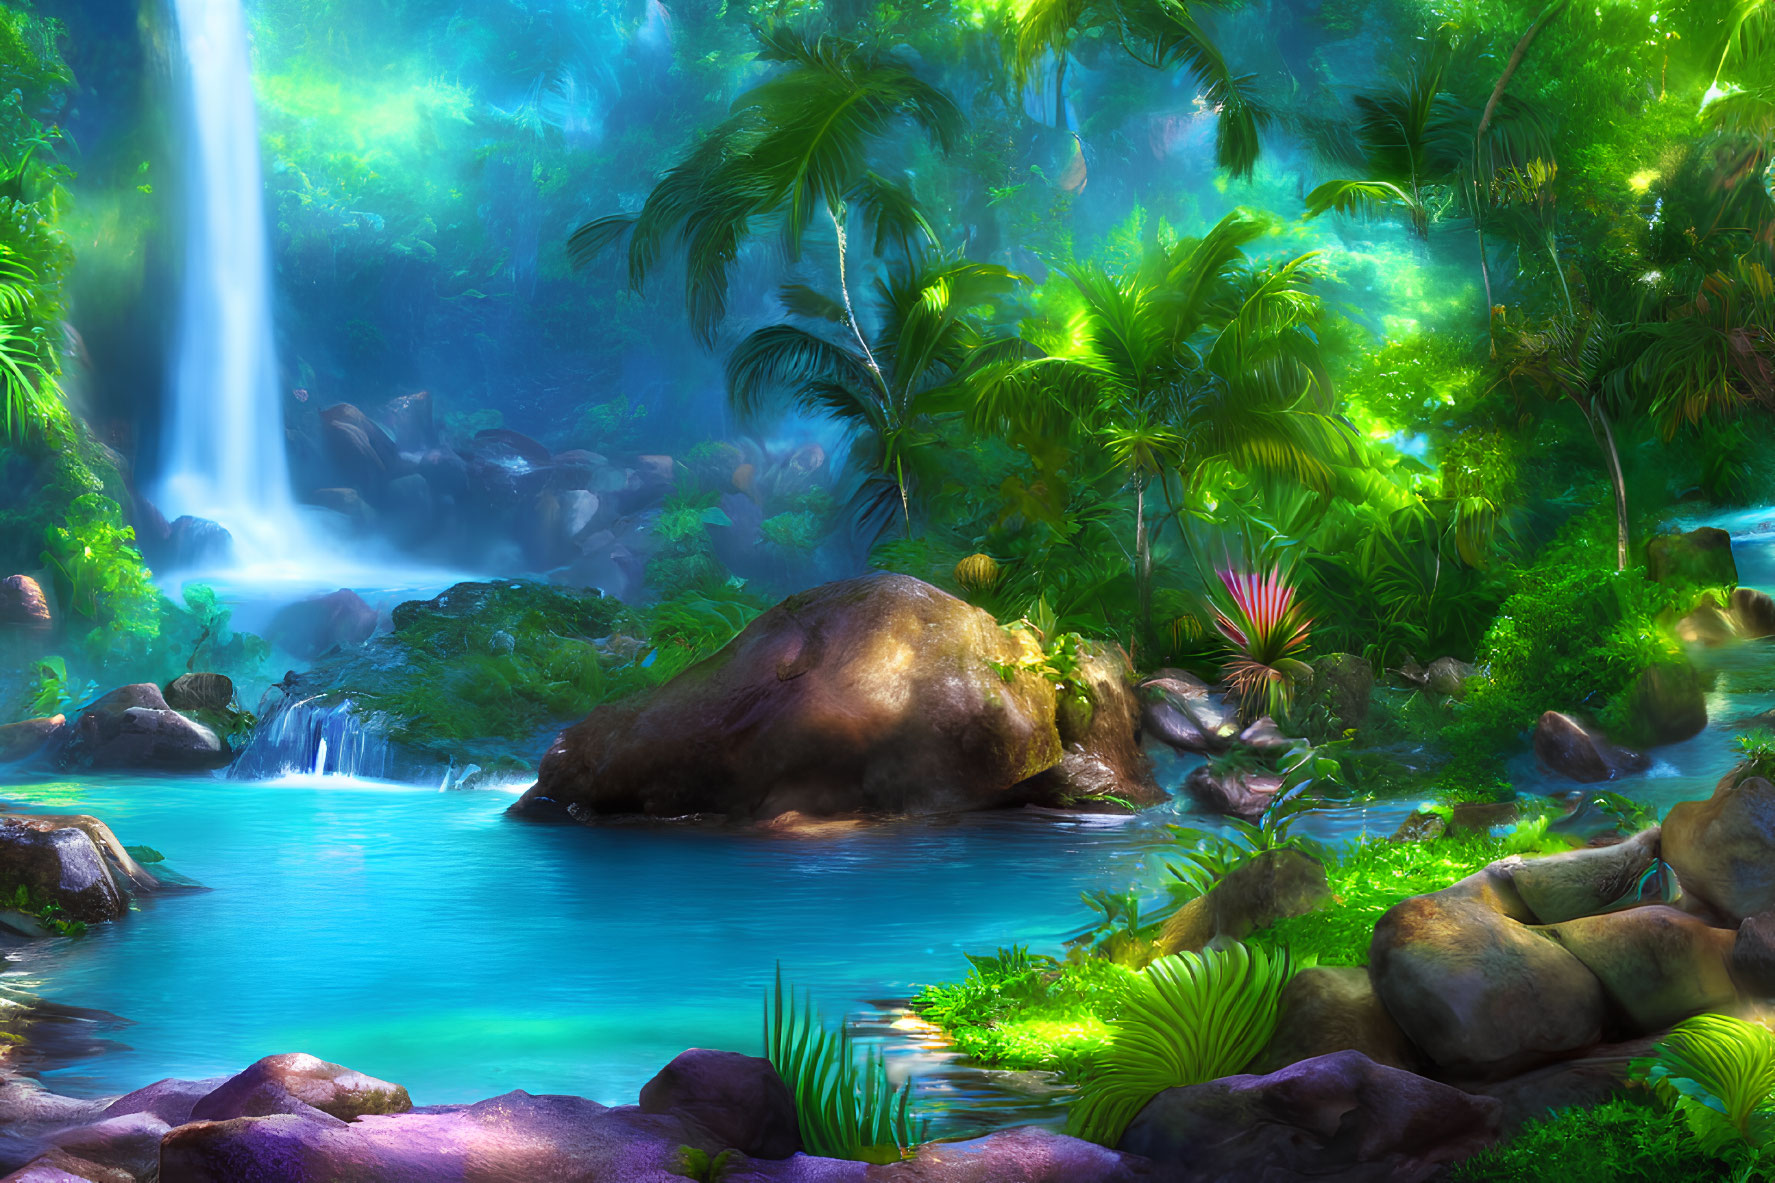 Tranquil Tropical Waterfall with Blue Pond and Lush Vegetation